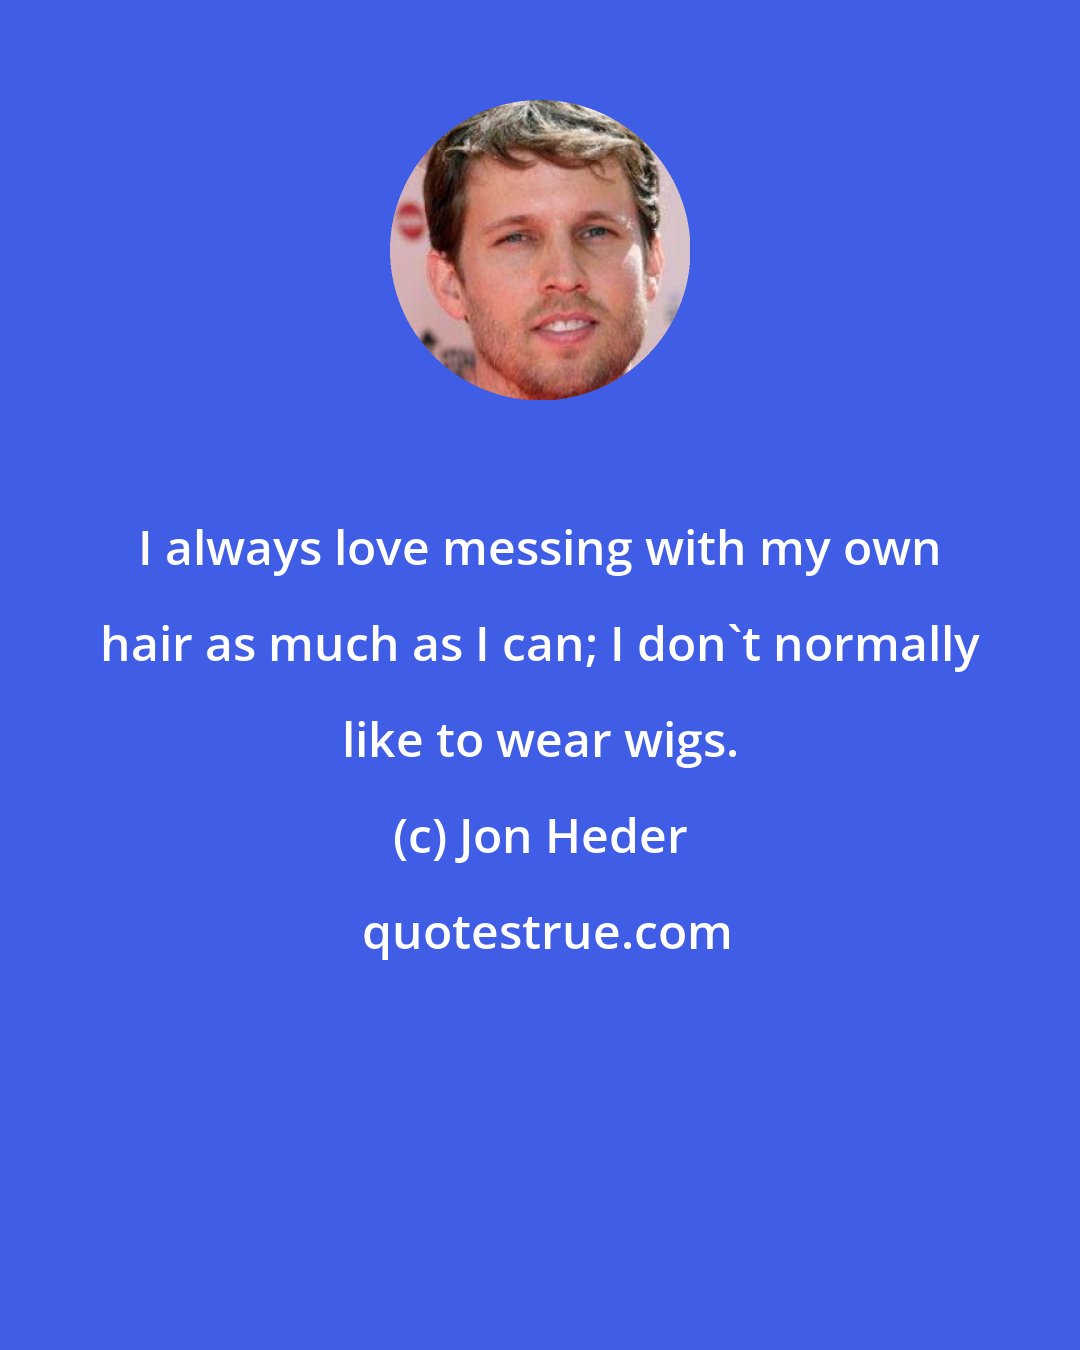 Jon Heder: I always love messing with my own hair as much as I can; I don't normally like to wear wigs.